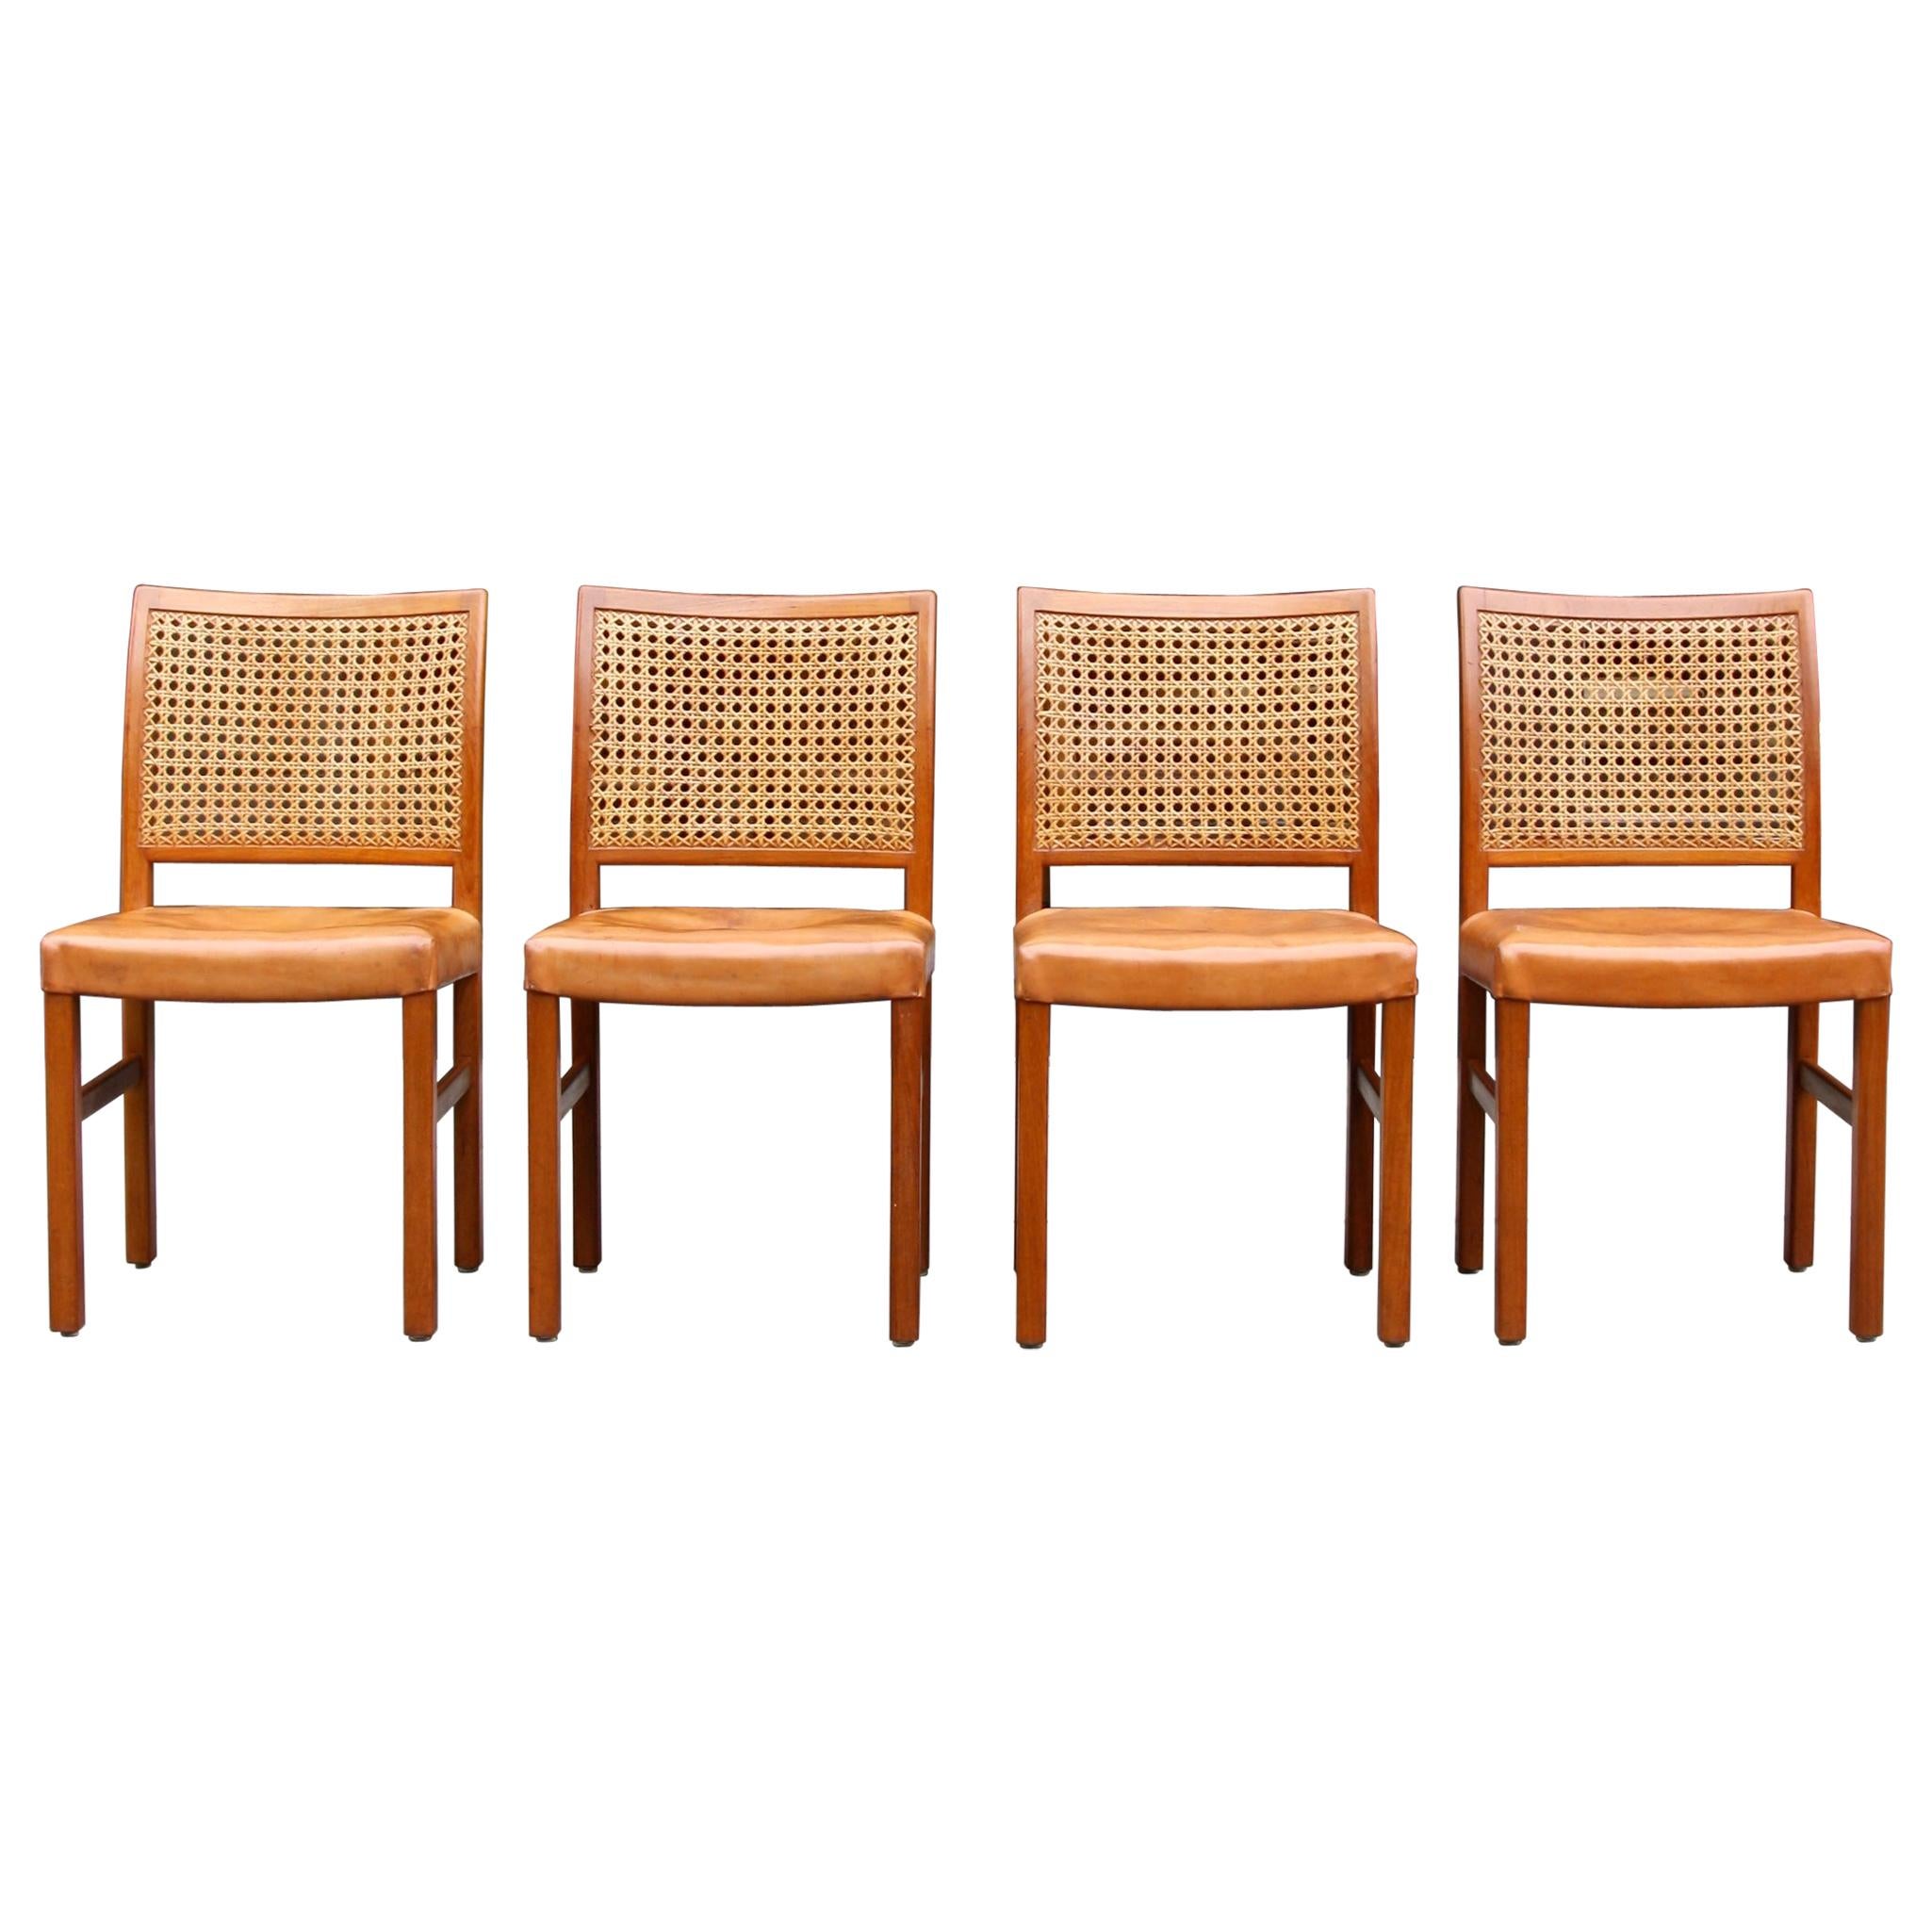 Set of 4 Carl-Gustav Hiort af Ornäs Teak, Leather and Woven Cane Dining Chairs